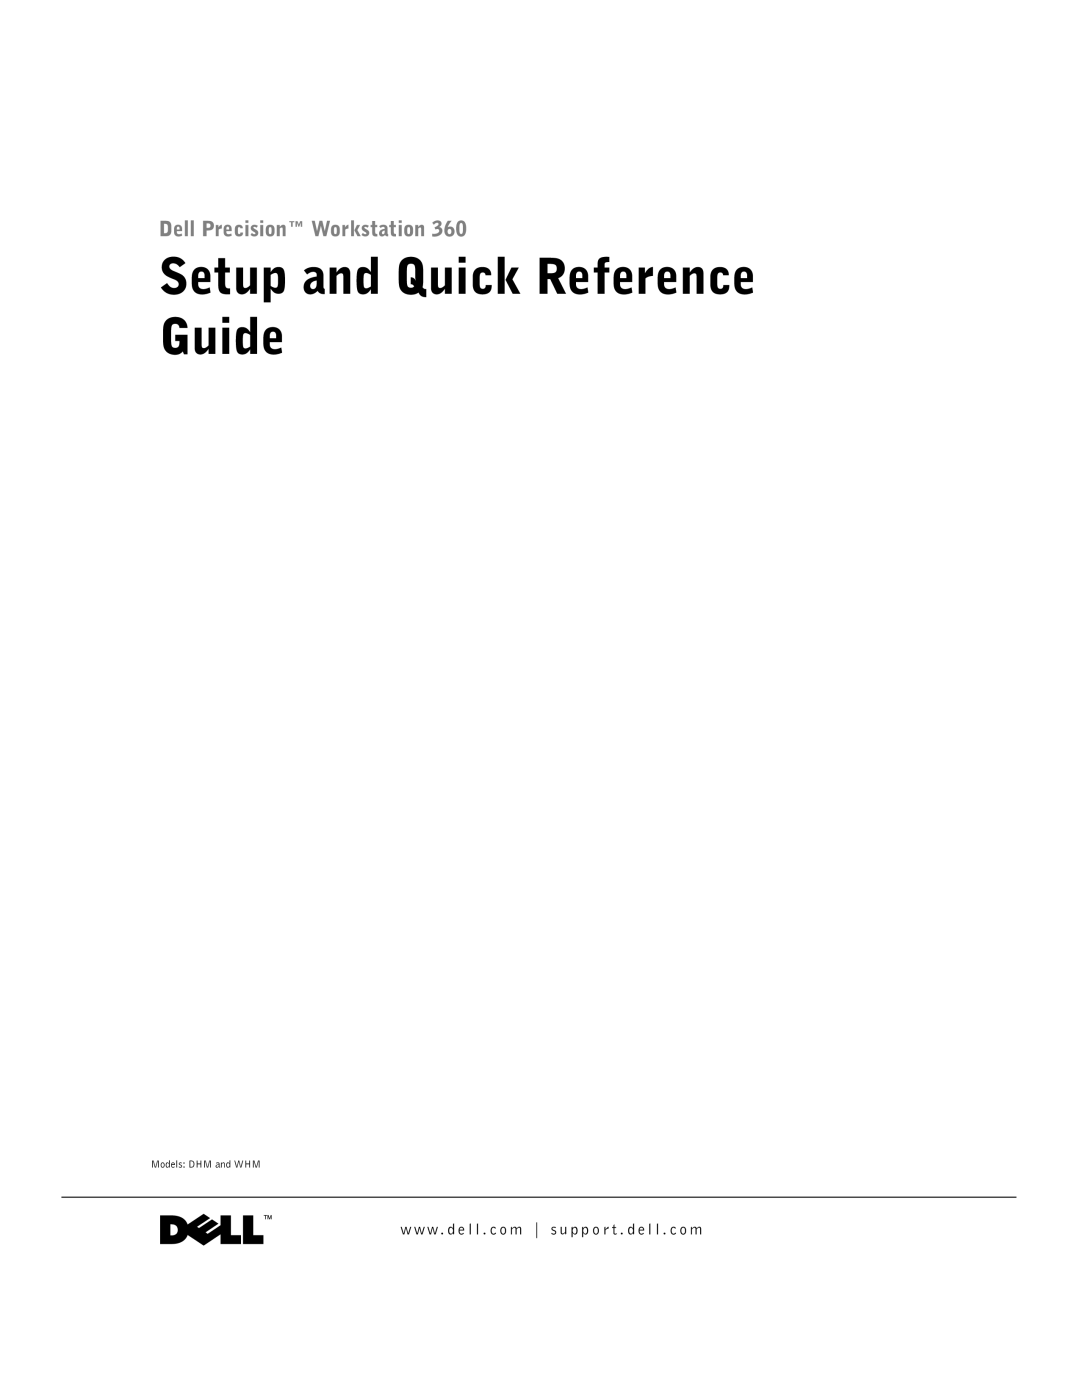 Dell F0276 manual Setup and Quick Reference Guide, W . d e l l . c o m s u p p o r t . d e l l . c o m 